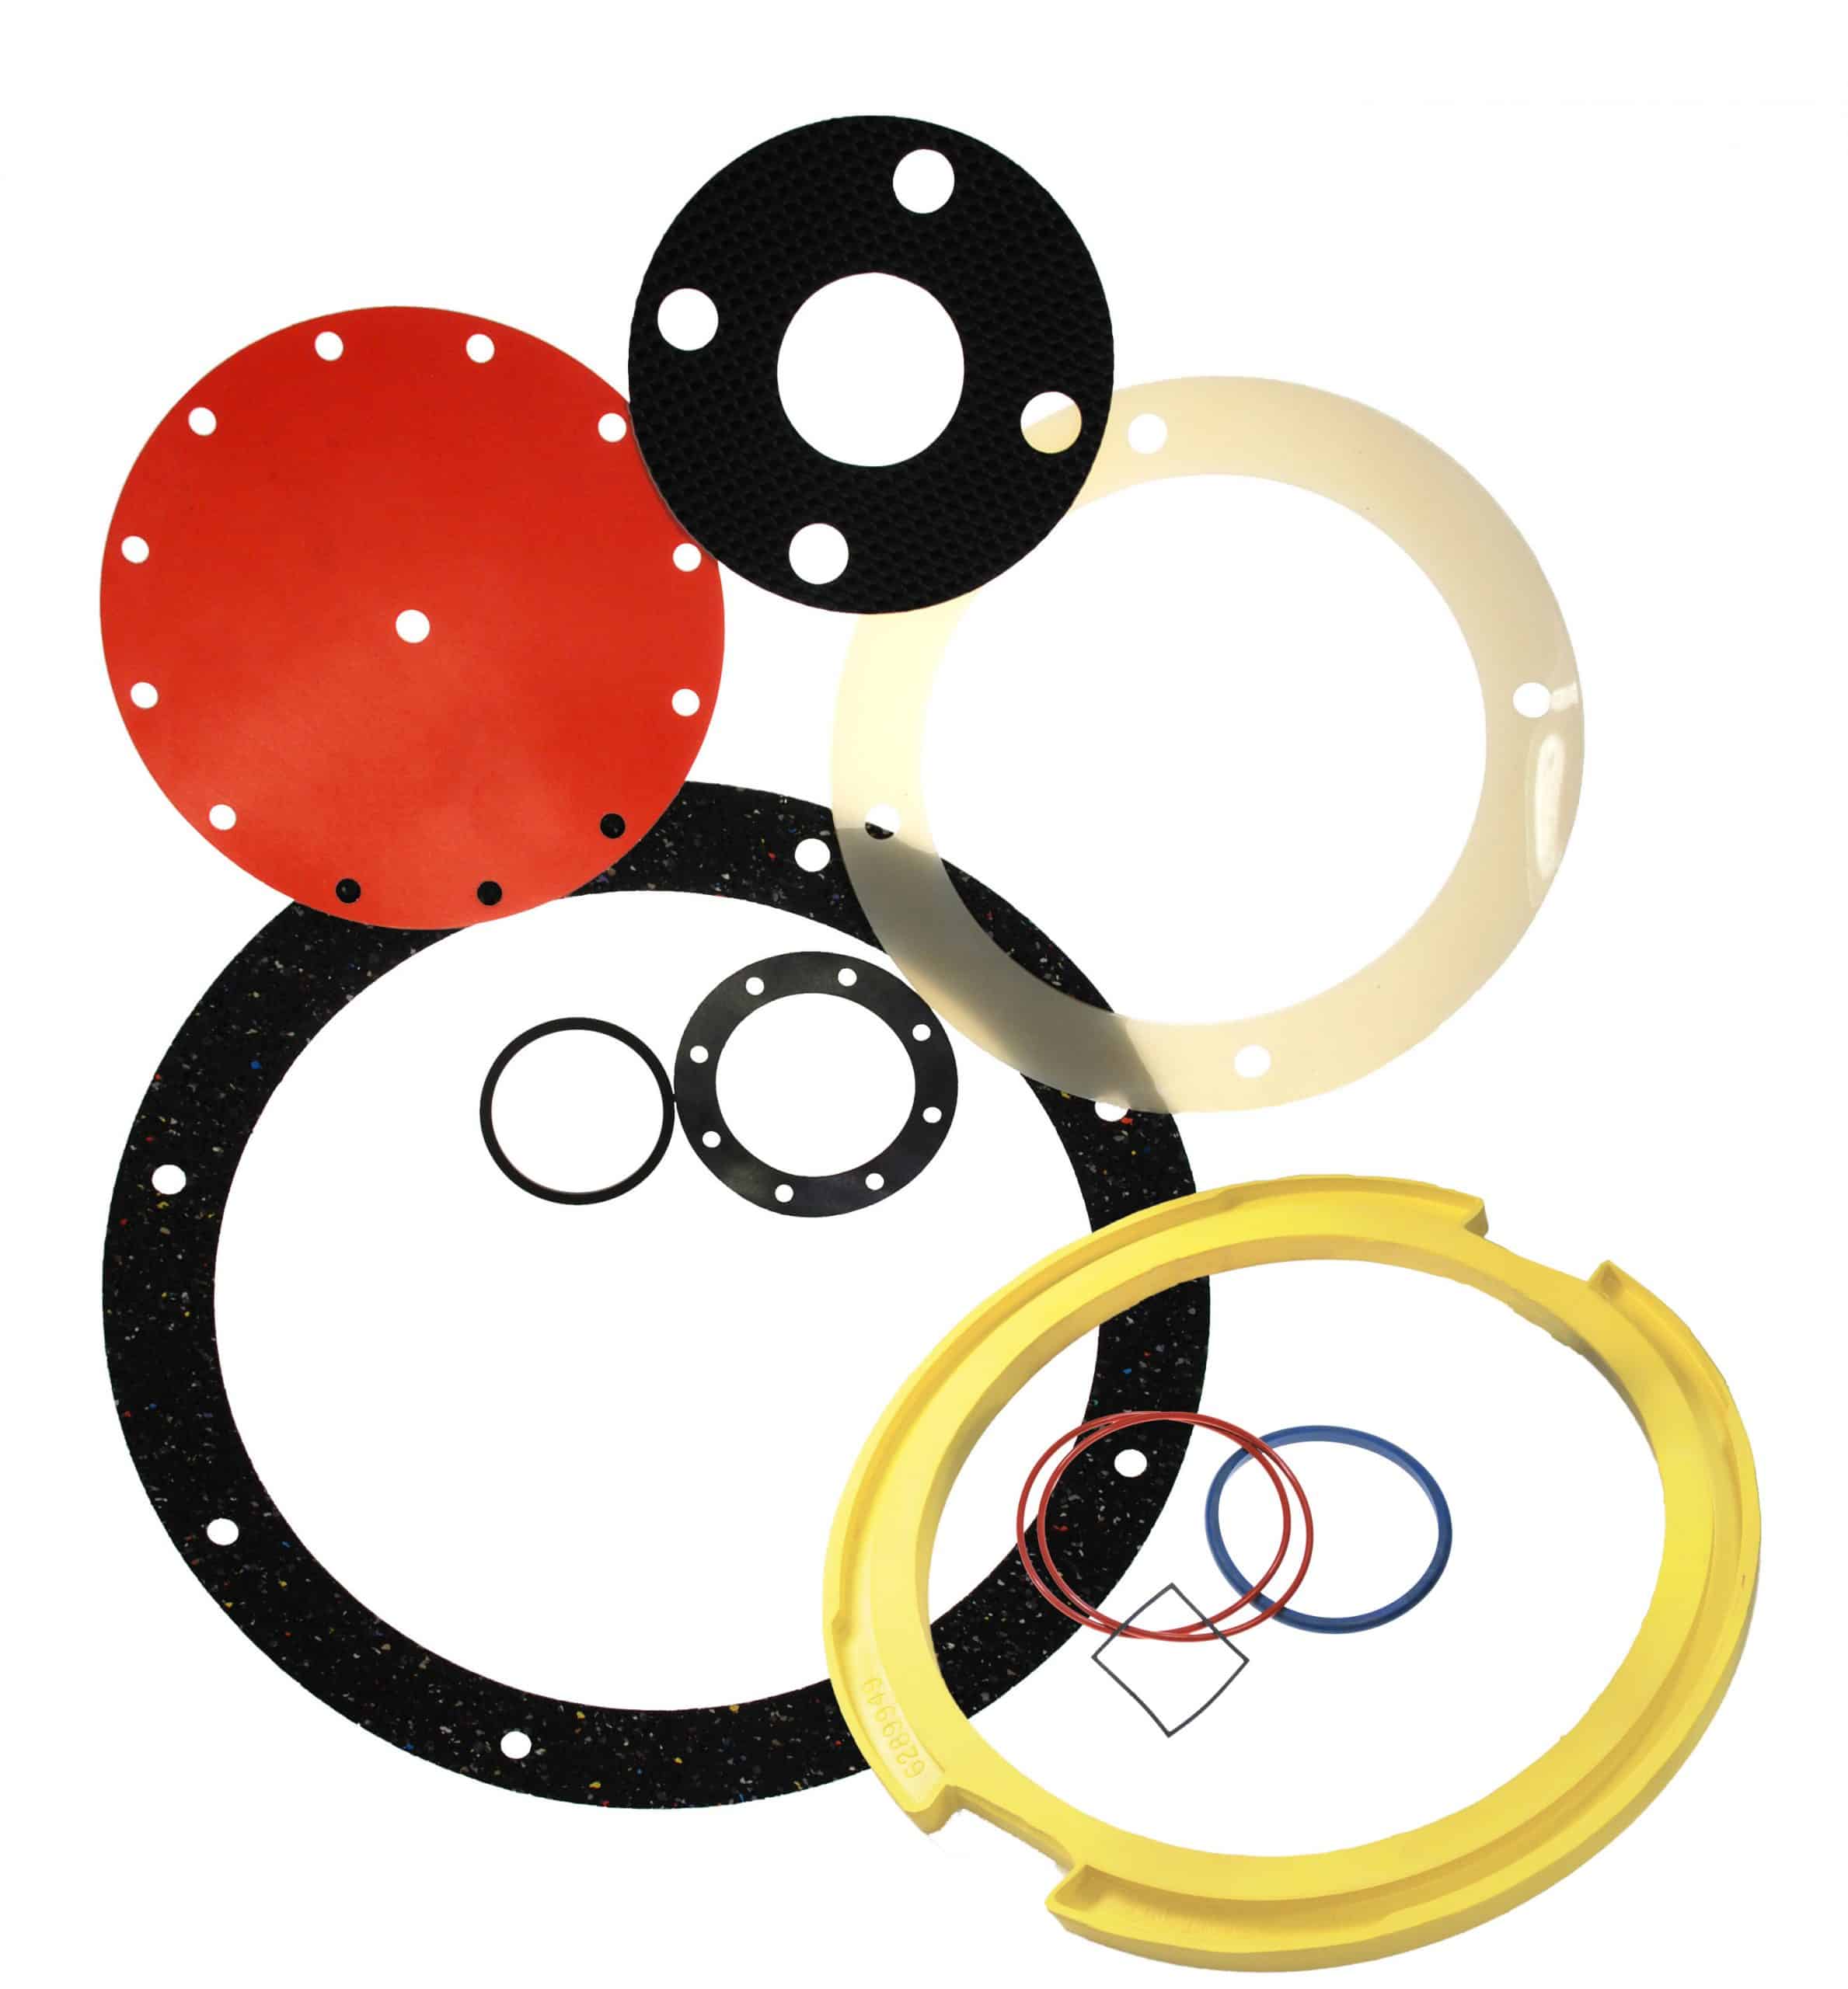 Rubber gaskets from aero rubber in a variety of shapes